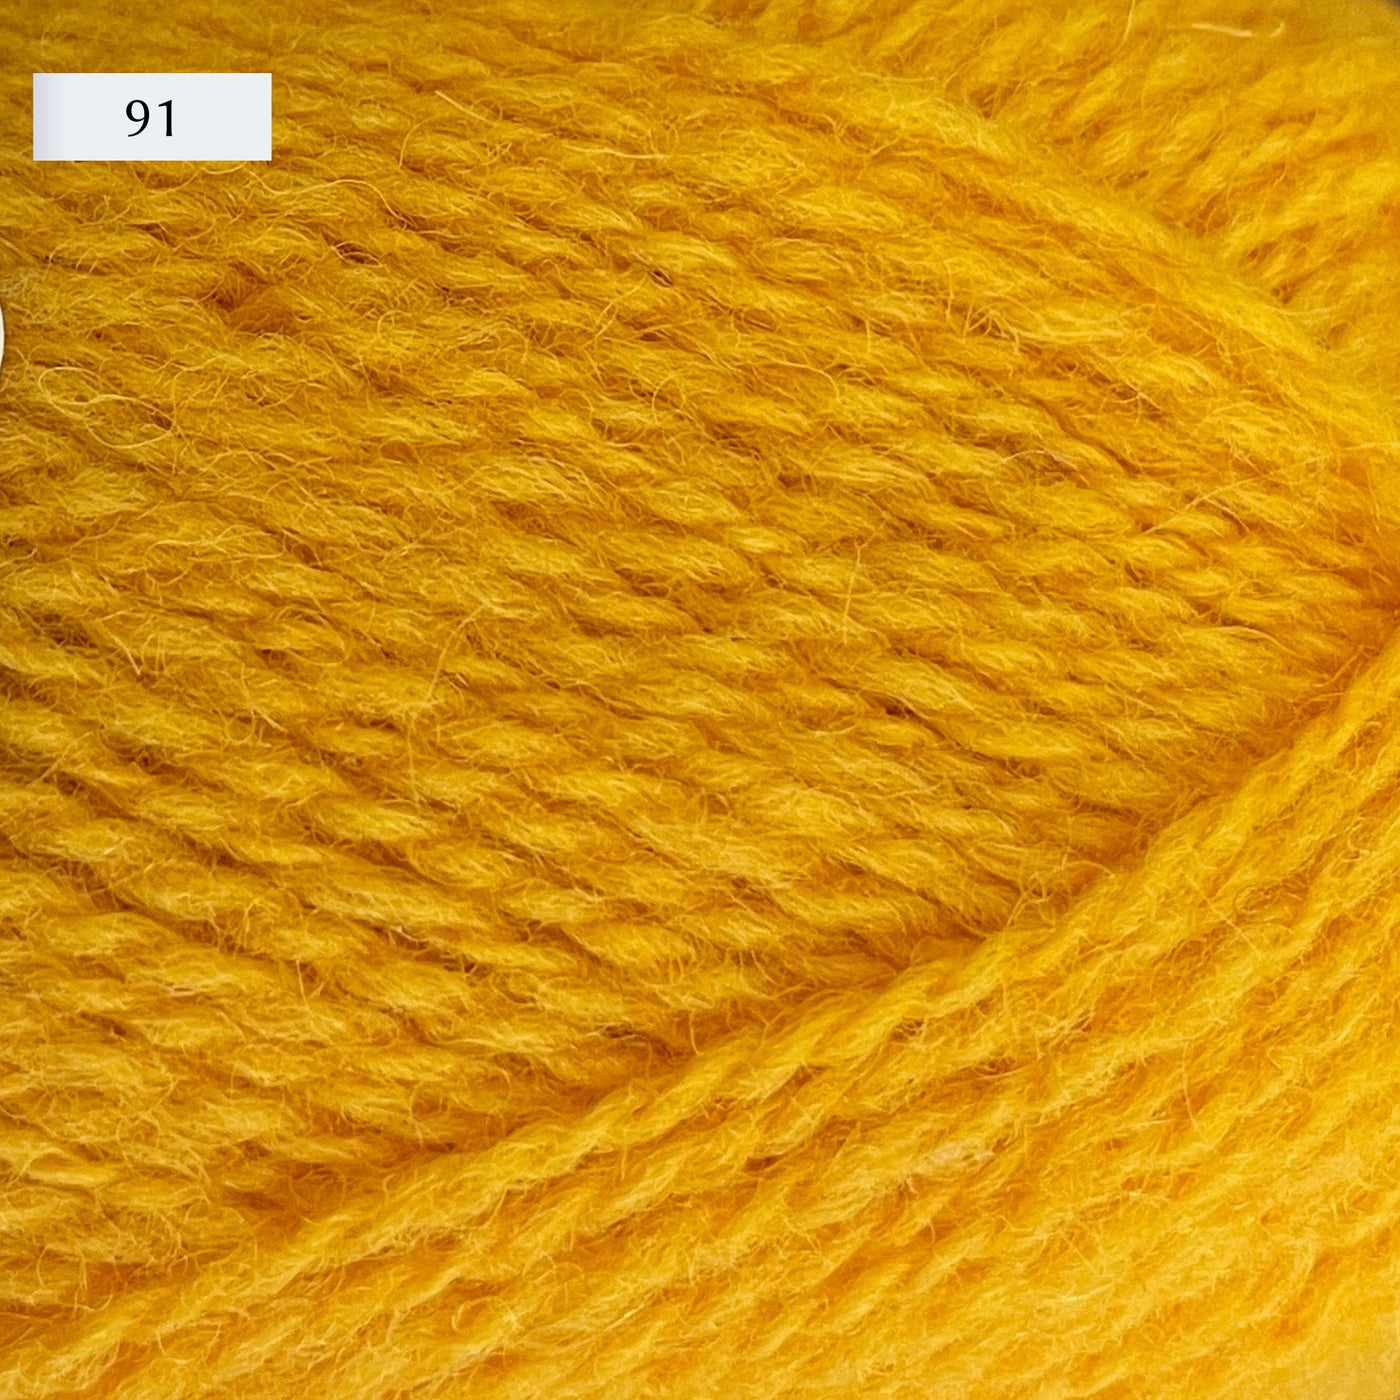 Jamieson & Smith 2ply Jumper Weight, light fingering weight yarn, in color 91, a rich golden yellow